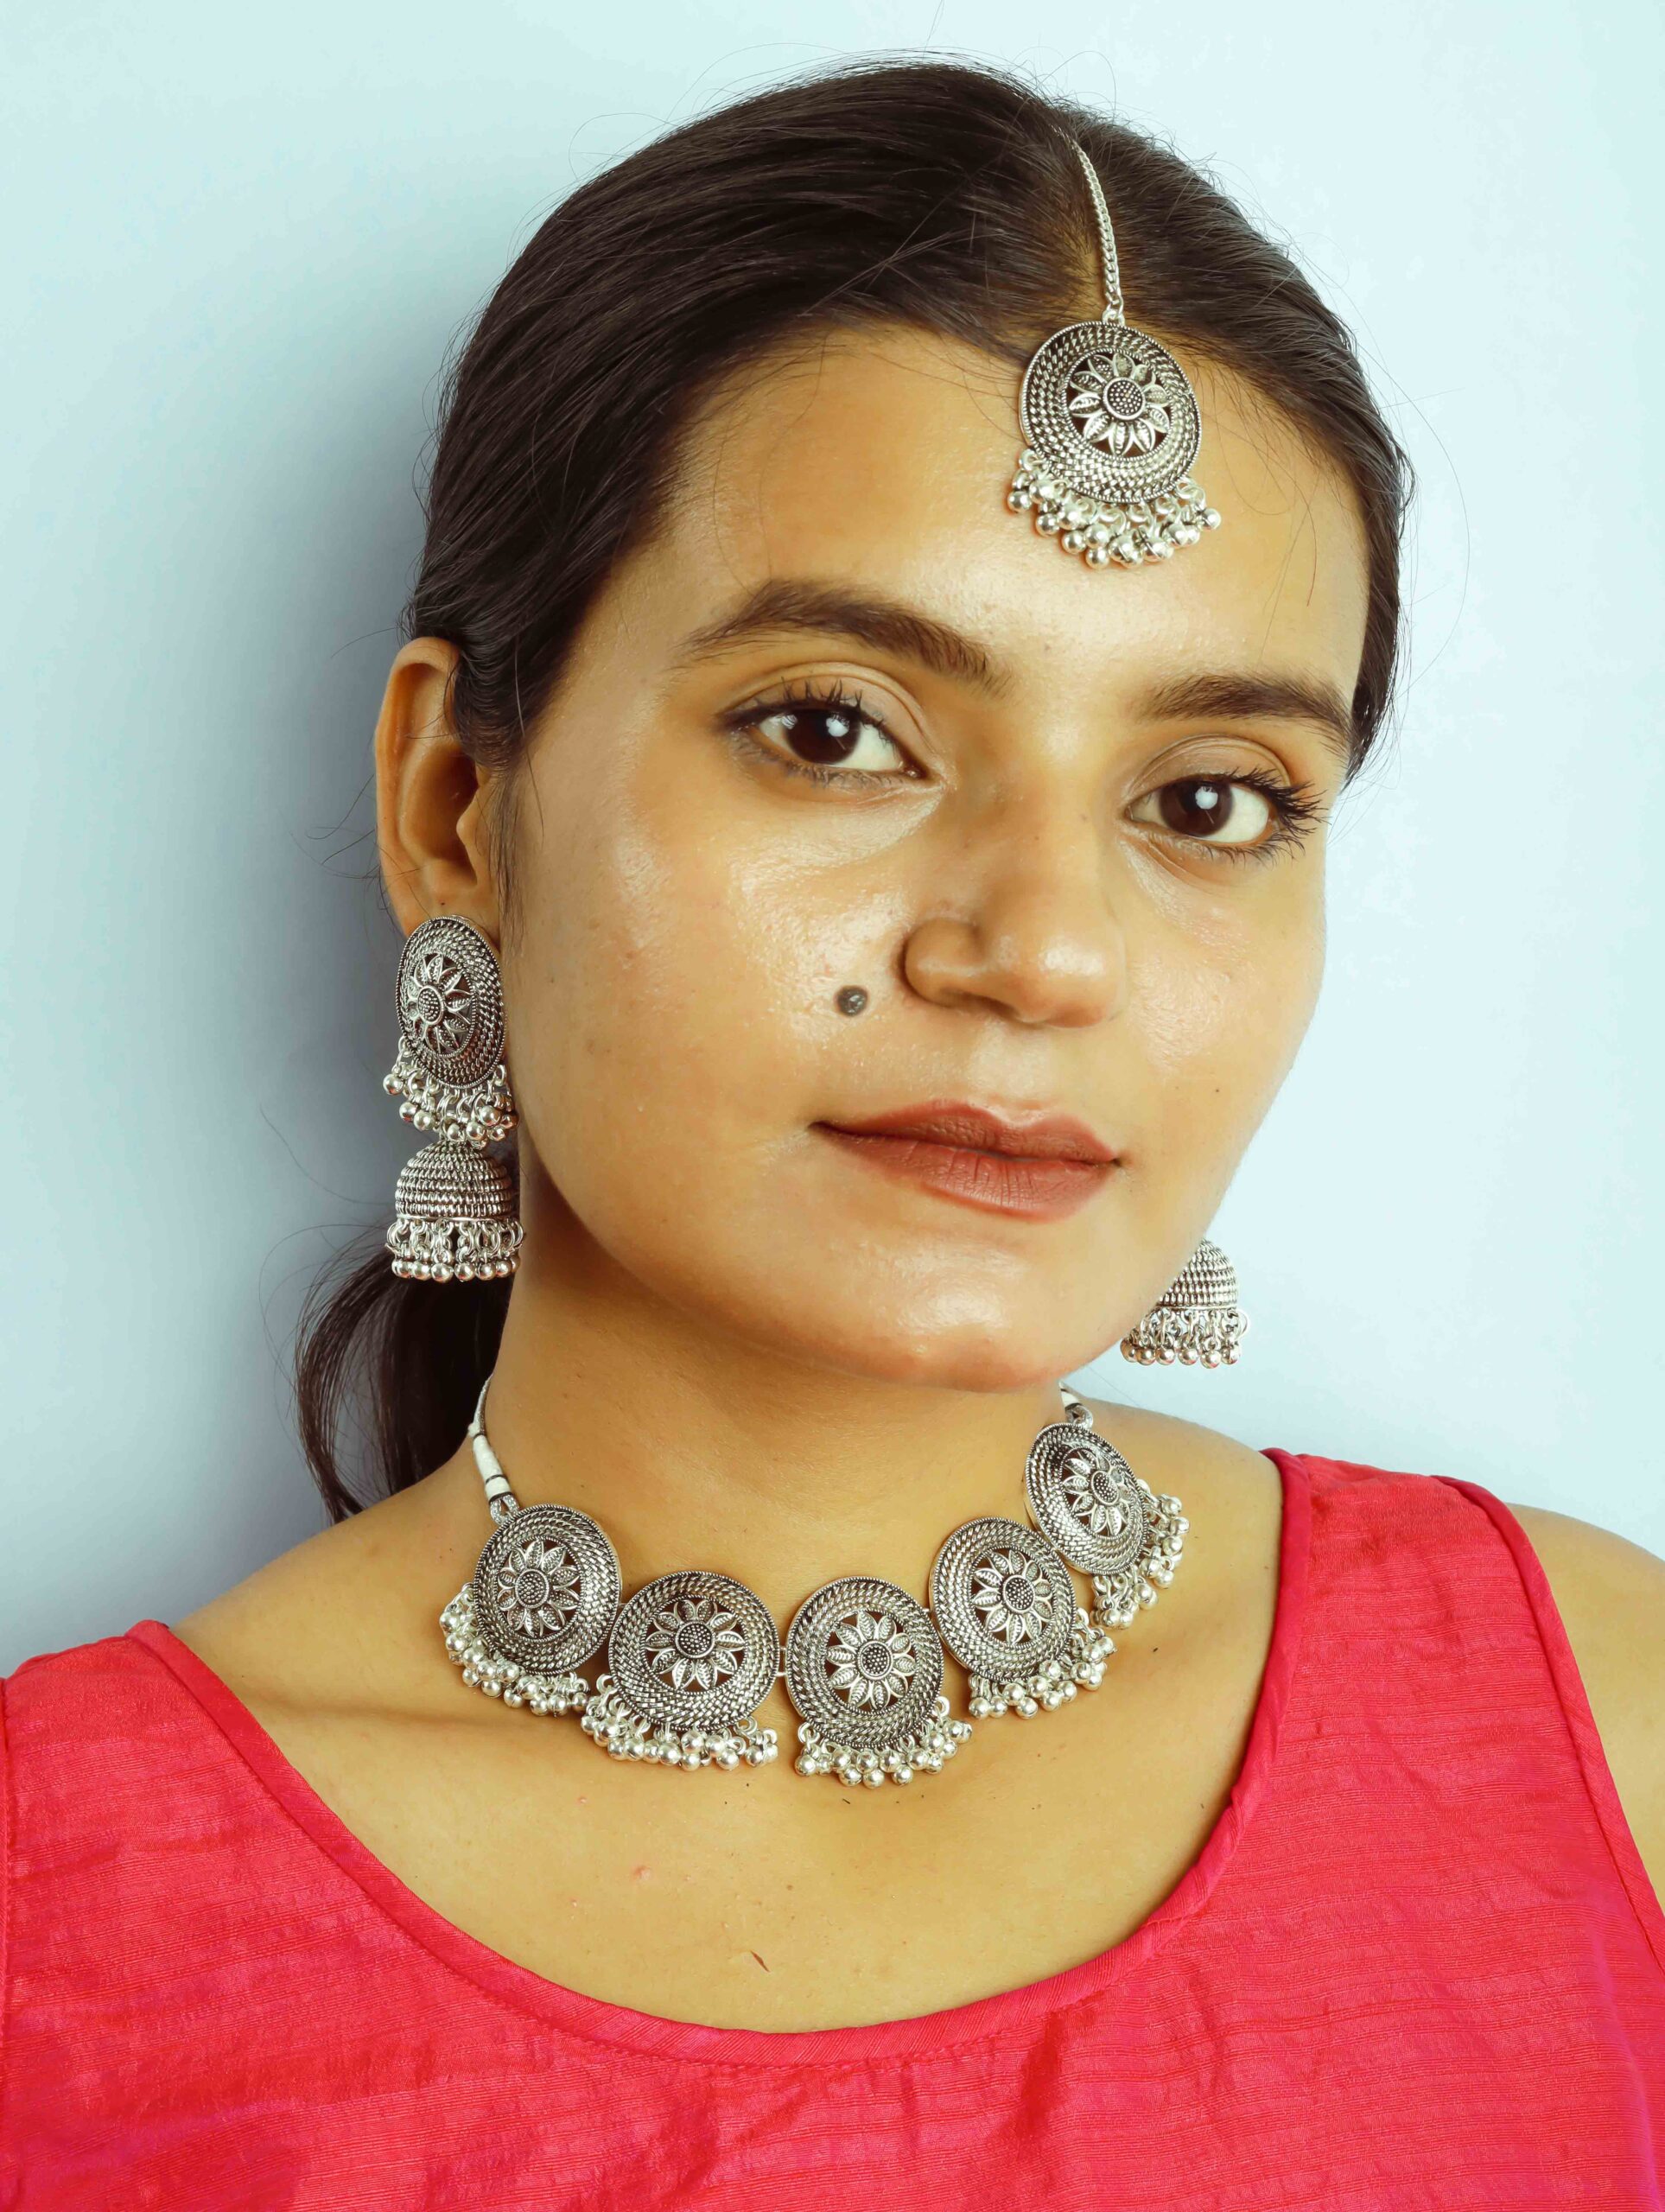 Jewelleries are hand carved in the purest form of silver to achieve authentic ethnic craftsmanship.